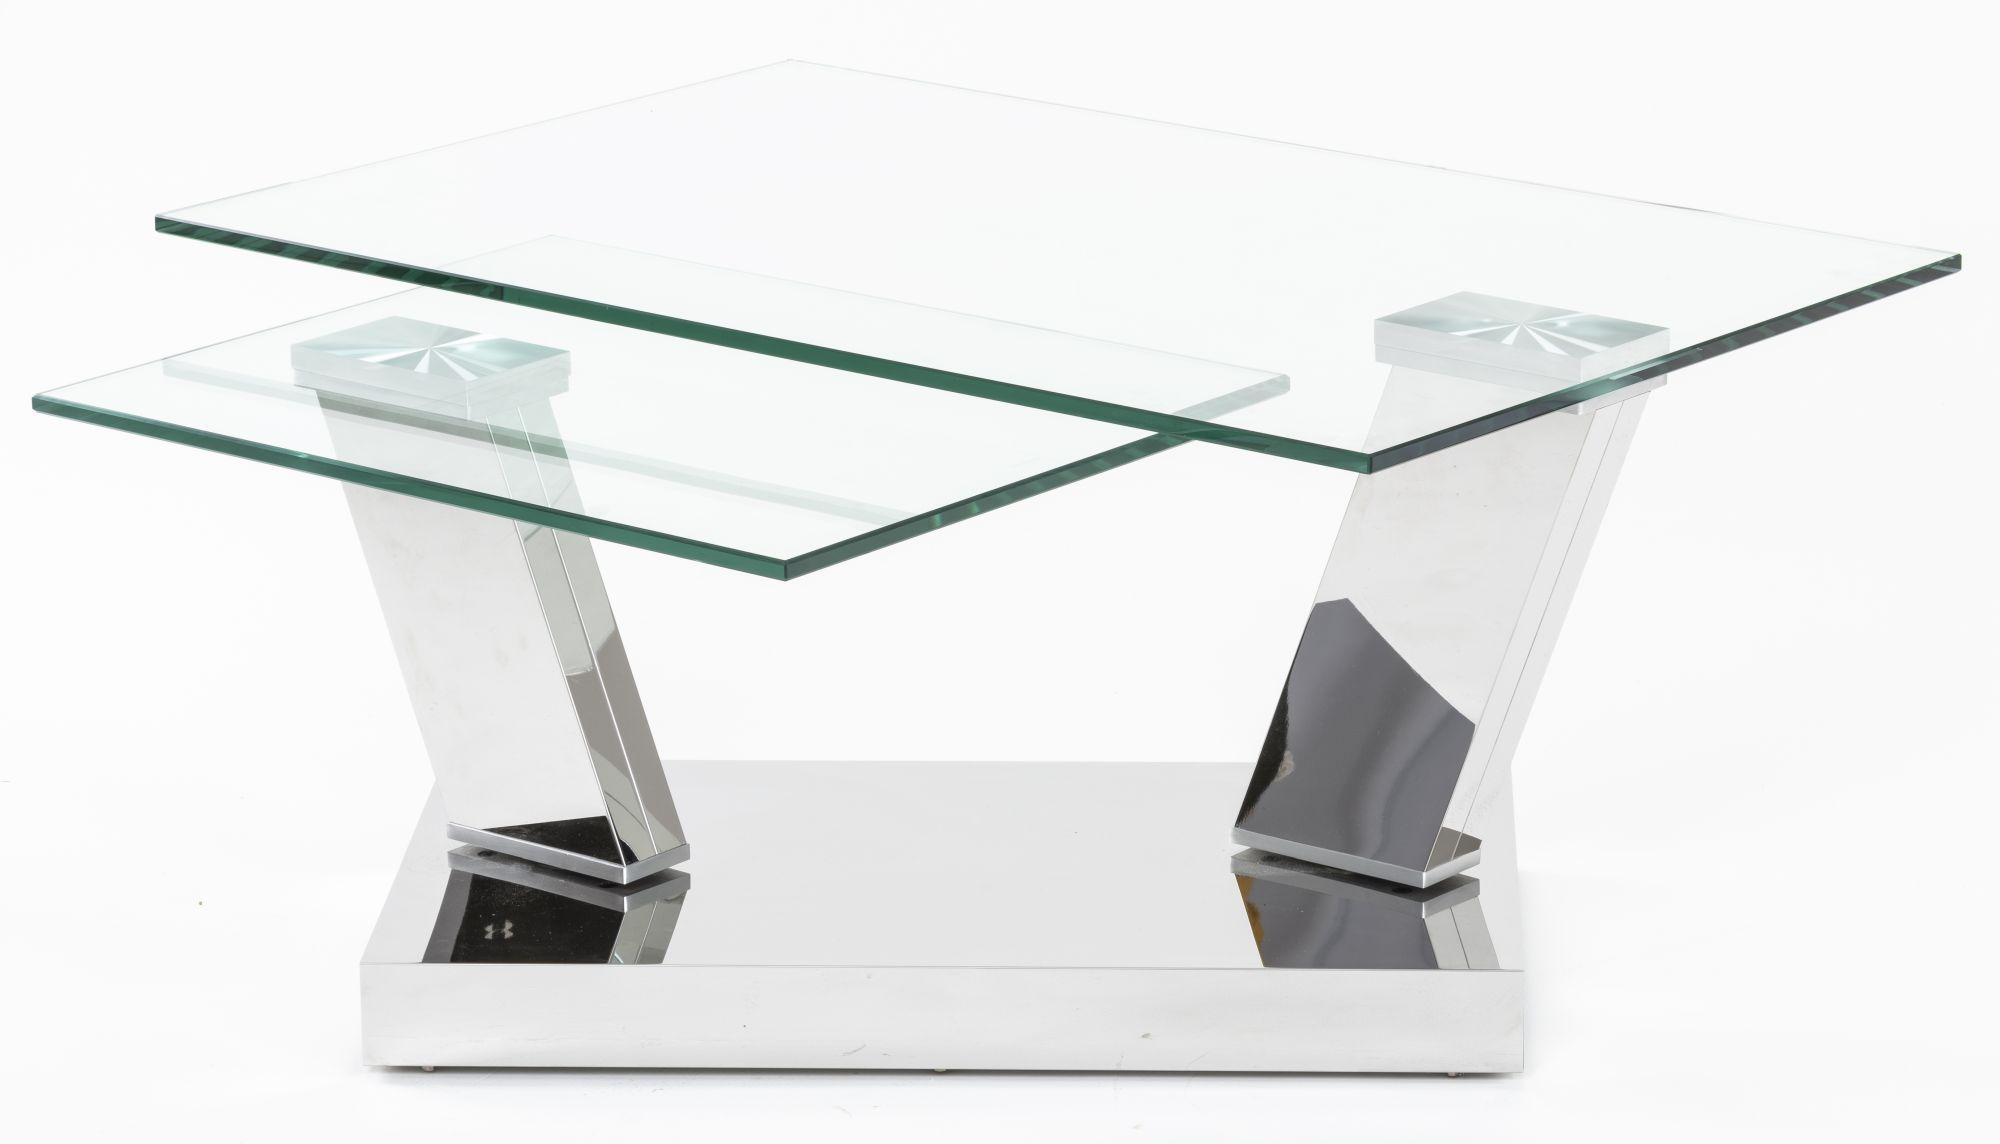 Fusion Swivel Glass Coffee Table, 2 Tier Rotating Glass Wings with Stainless Steel Chrome Frame